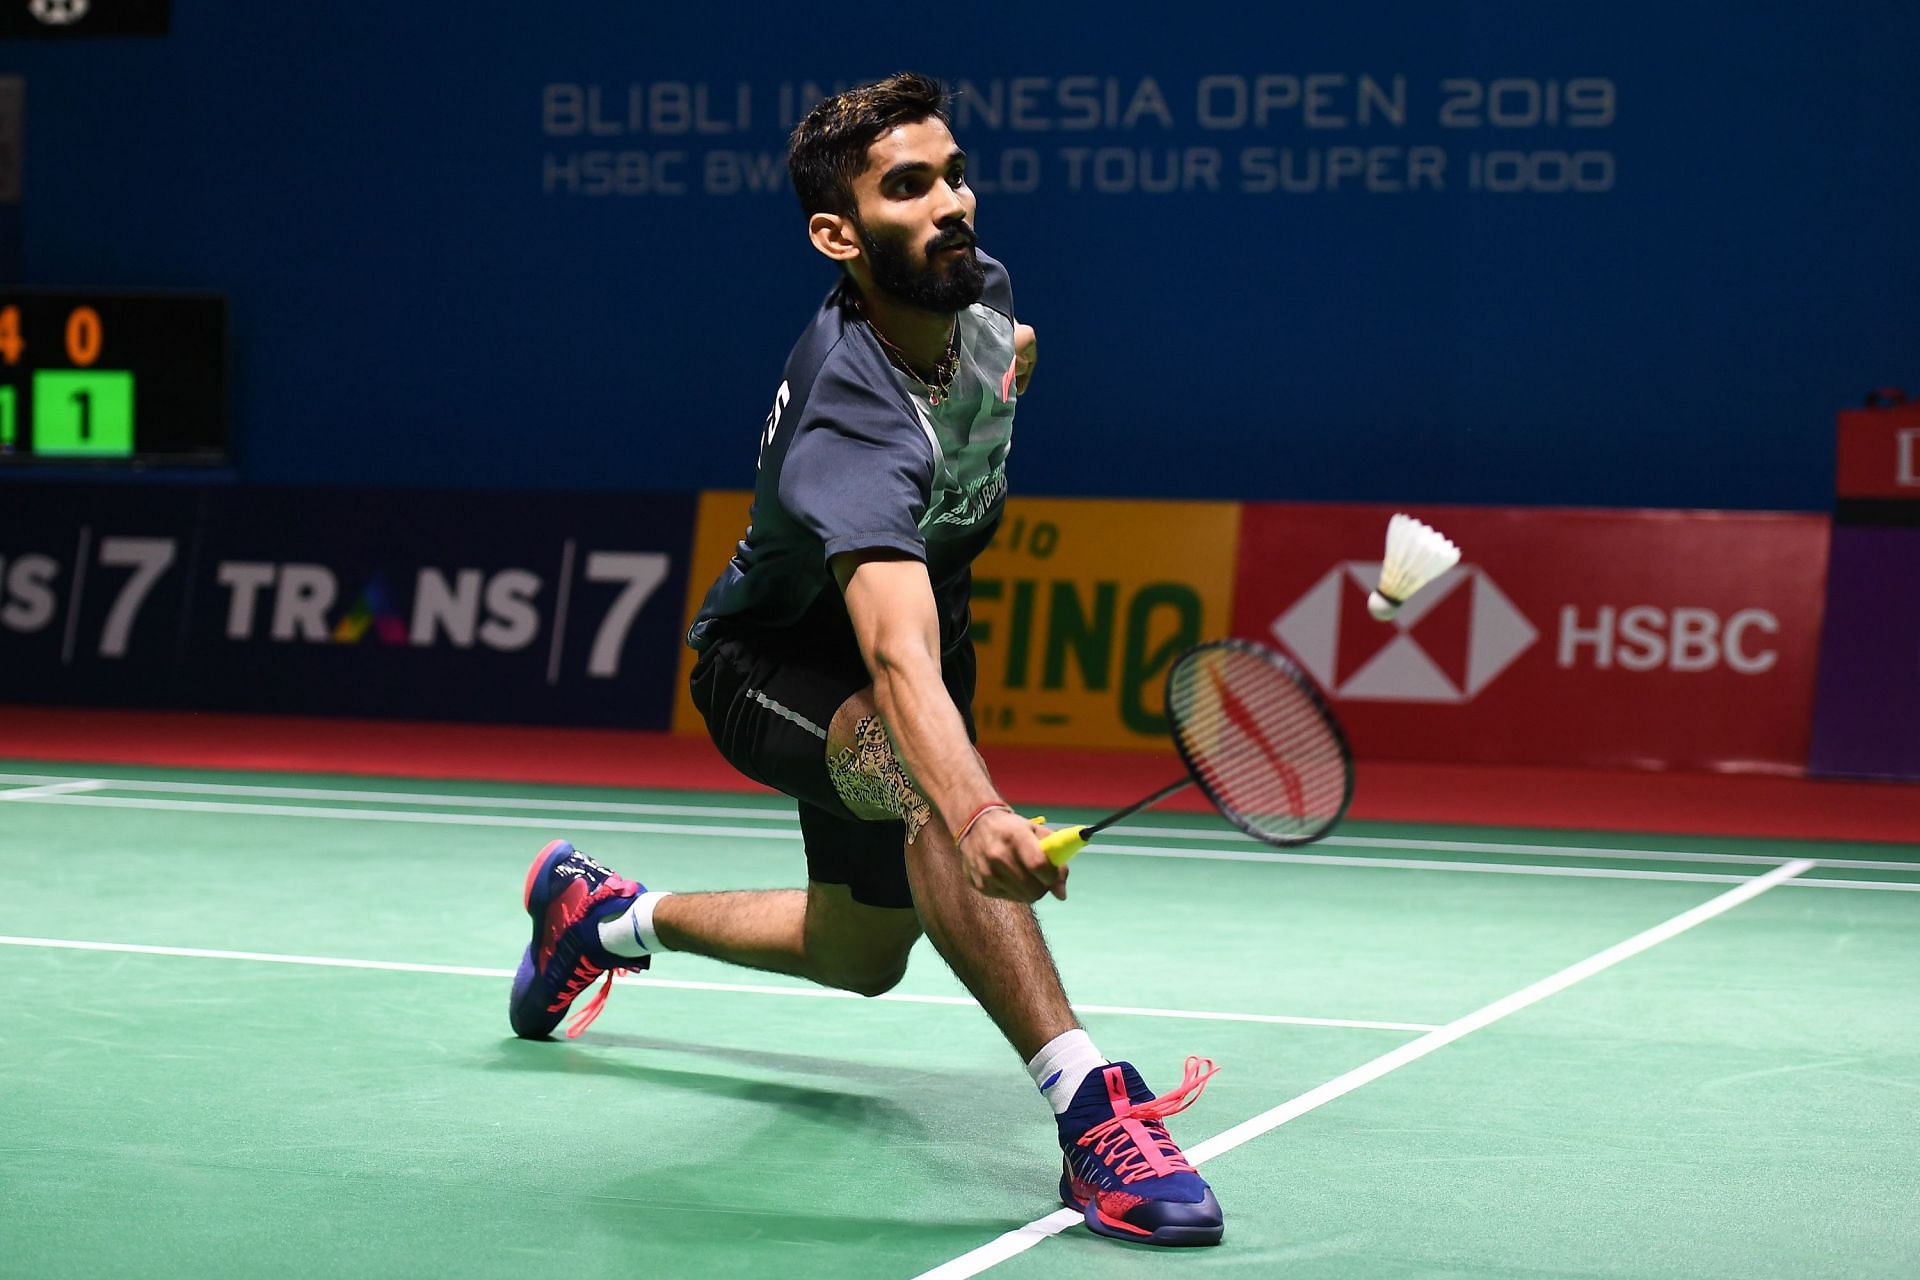 Kidambi Srikanth in action at the 2019 Indonesia Open